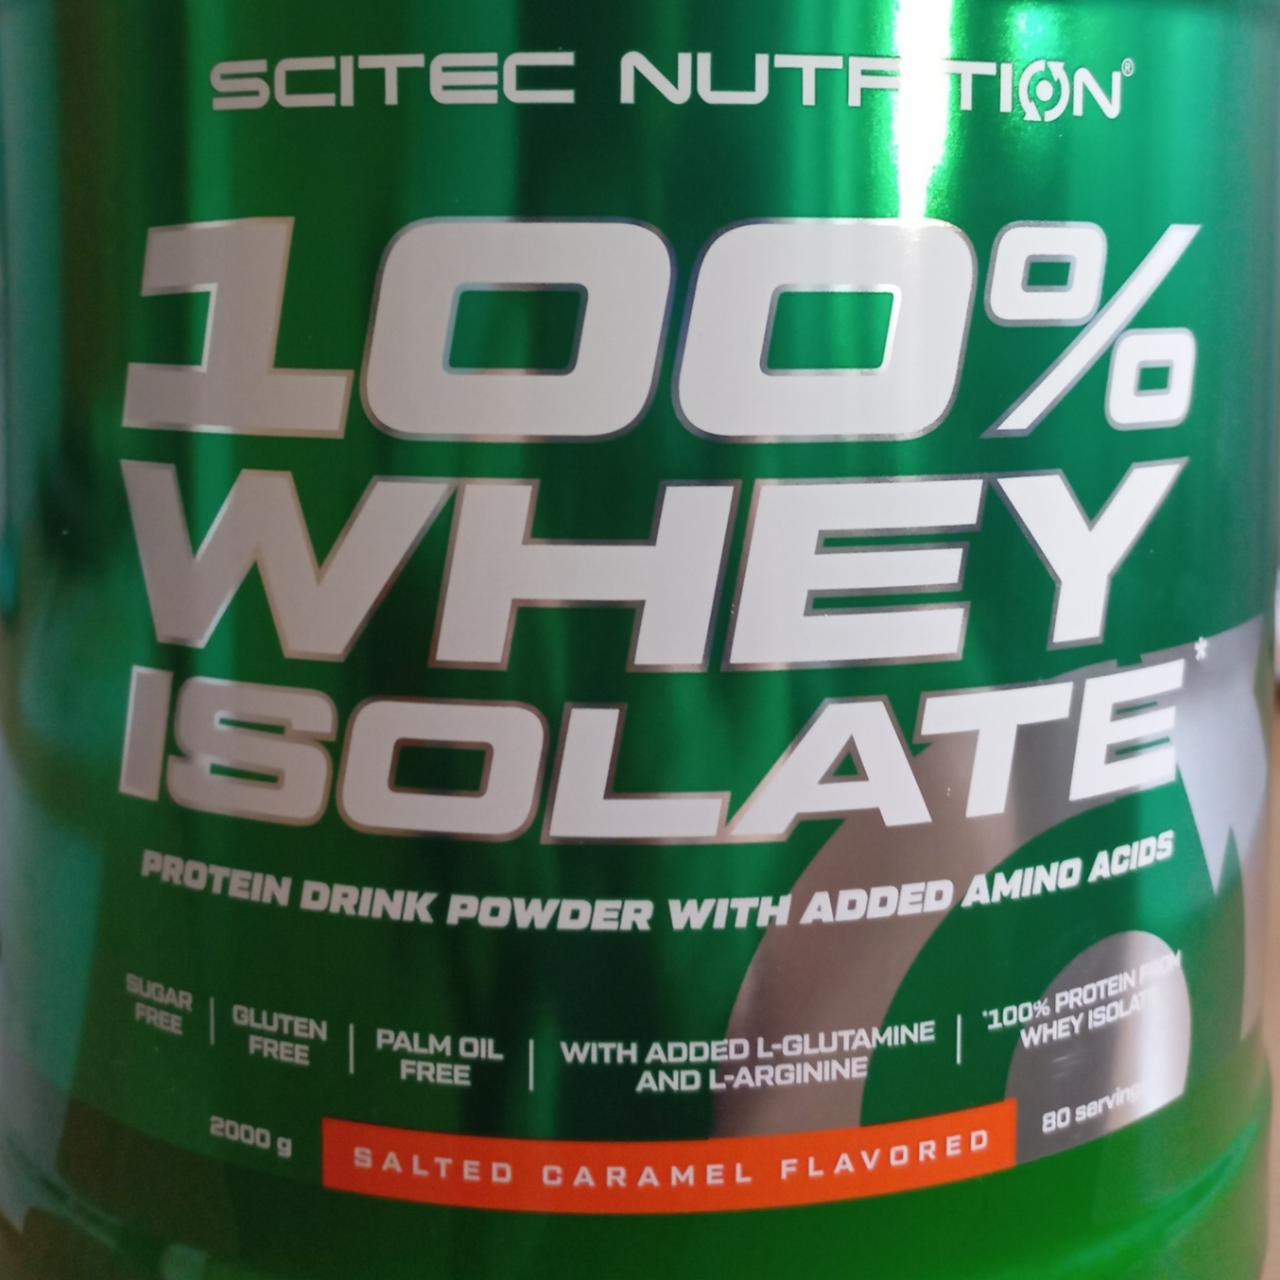 Fotografie - 100% Whey isolate Salted caramel Scitec Nutrition